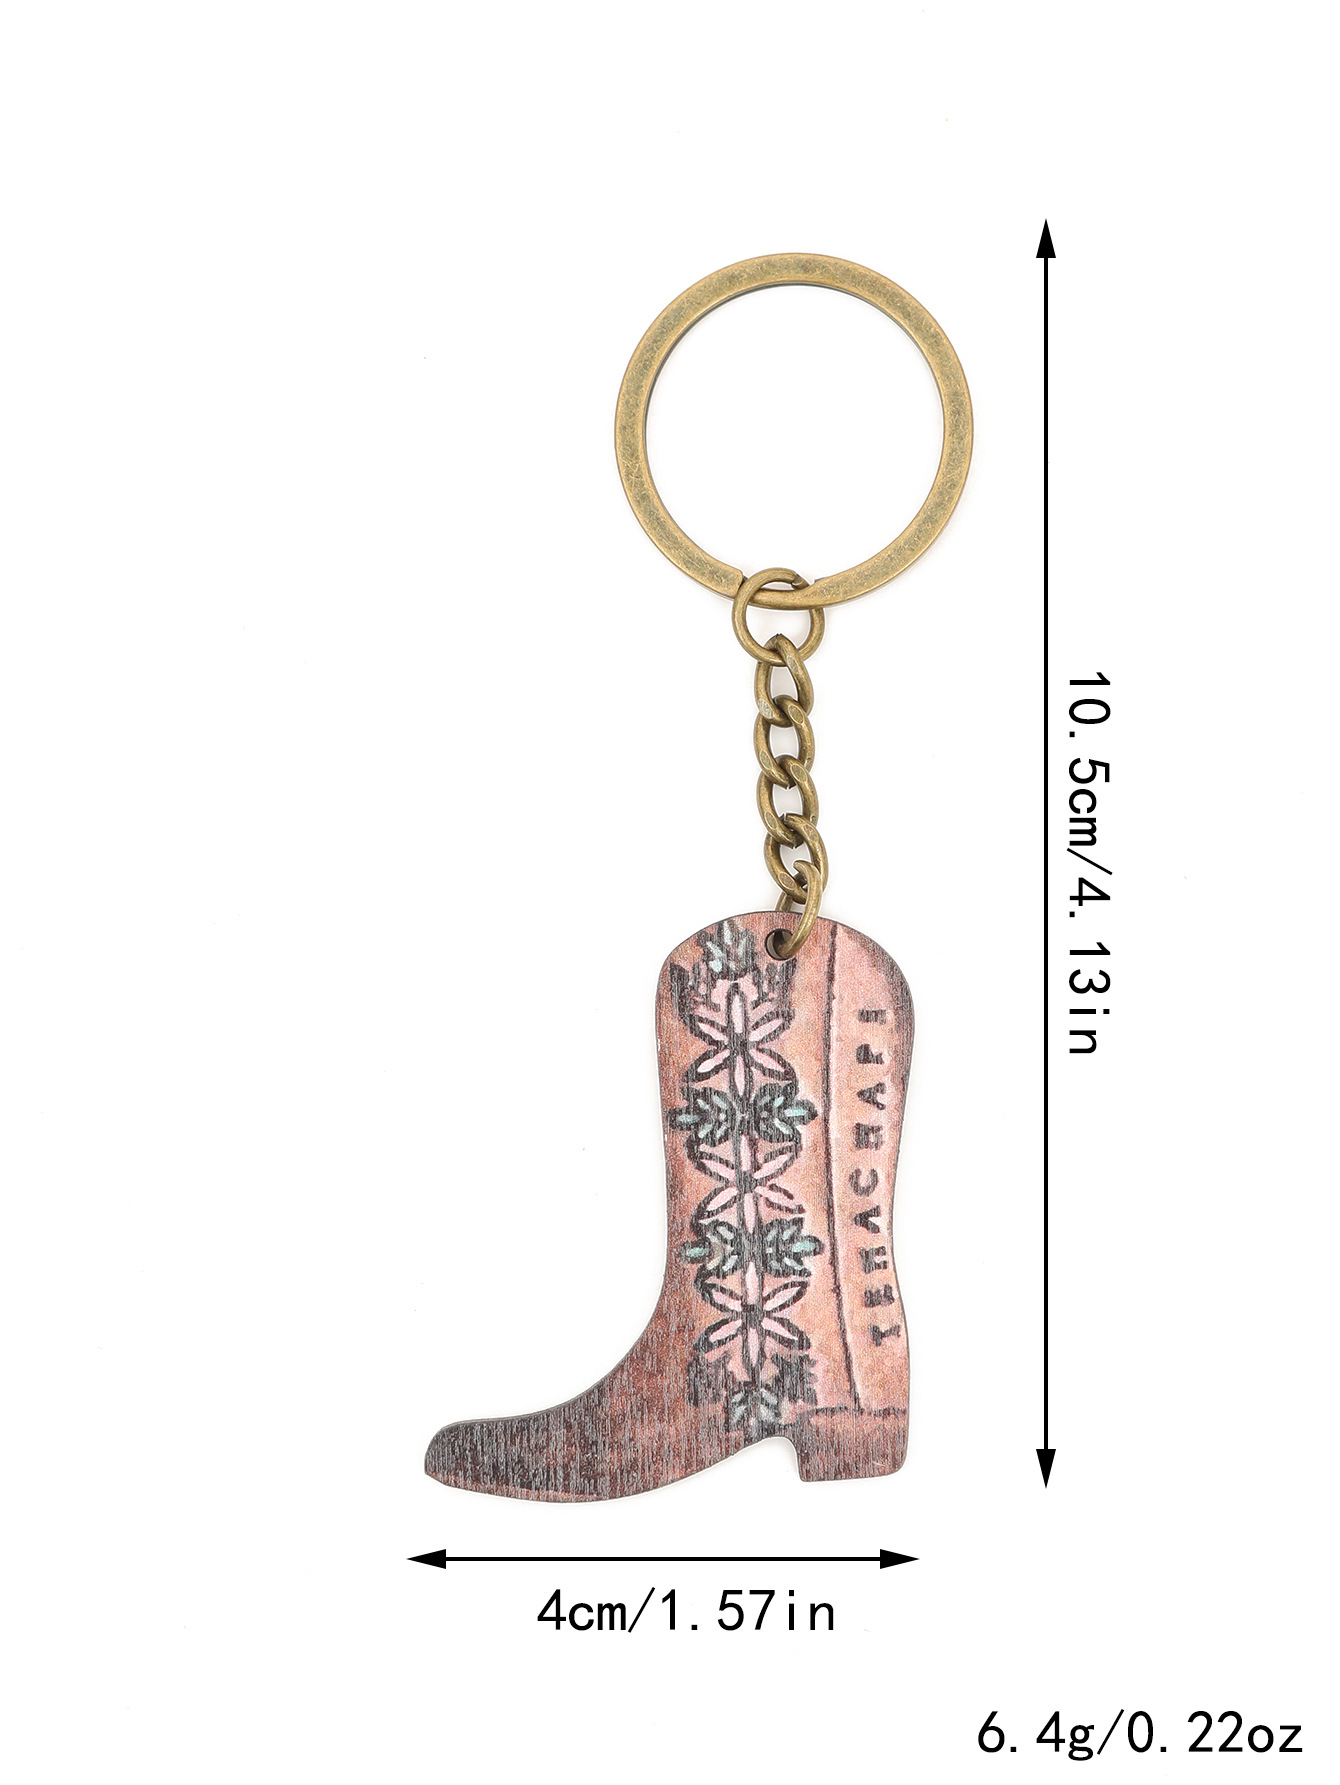 Cross-Border Western Style Boots Keychain Cars and Bags Pendant AliExpress European and American Amazon